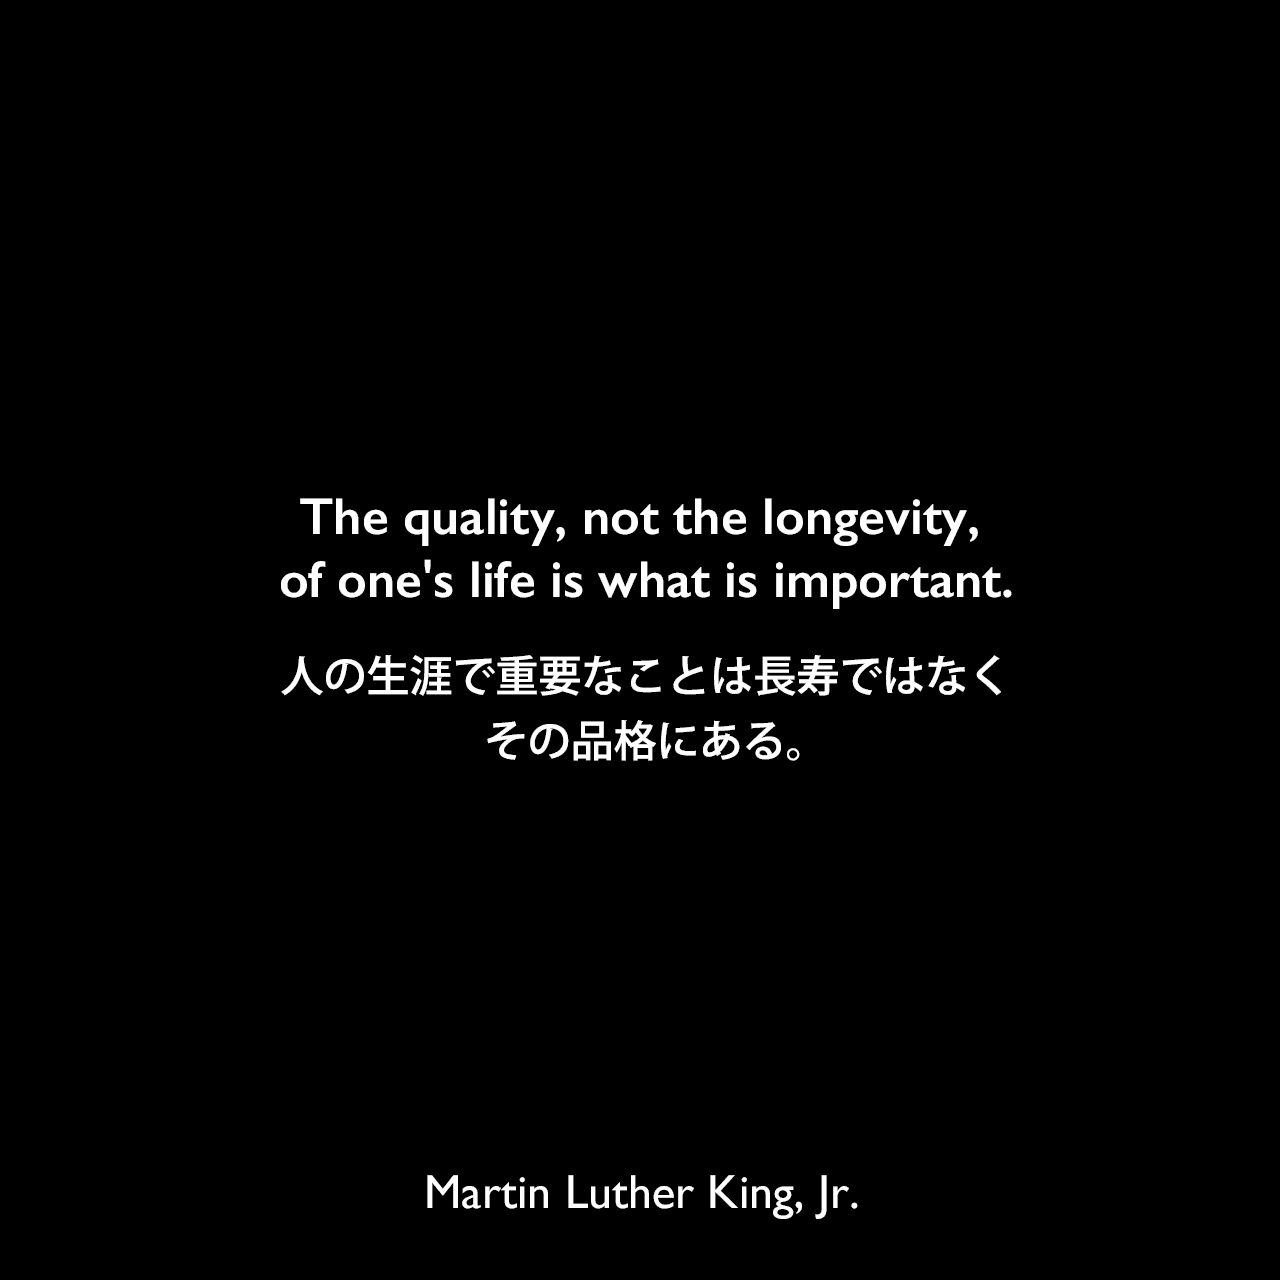 The quality, not the longevity, of one's life is what is important.人の生涯で重要なことは長寿ではなくその品格にある。Martin Luther King, Jr.